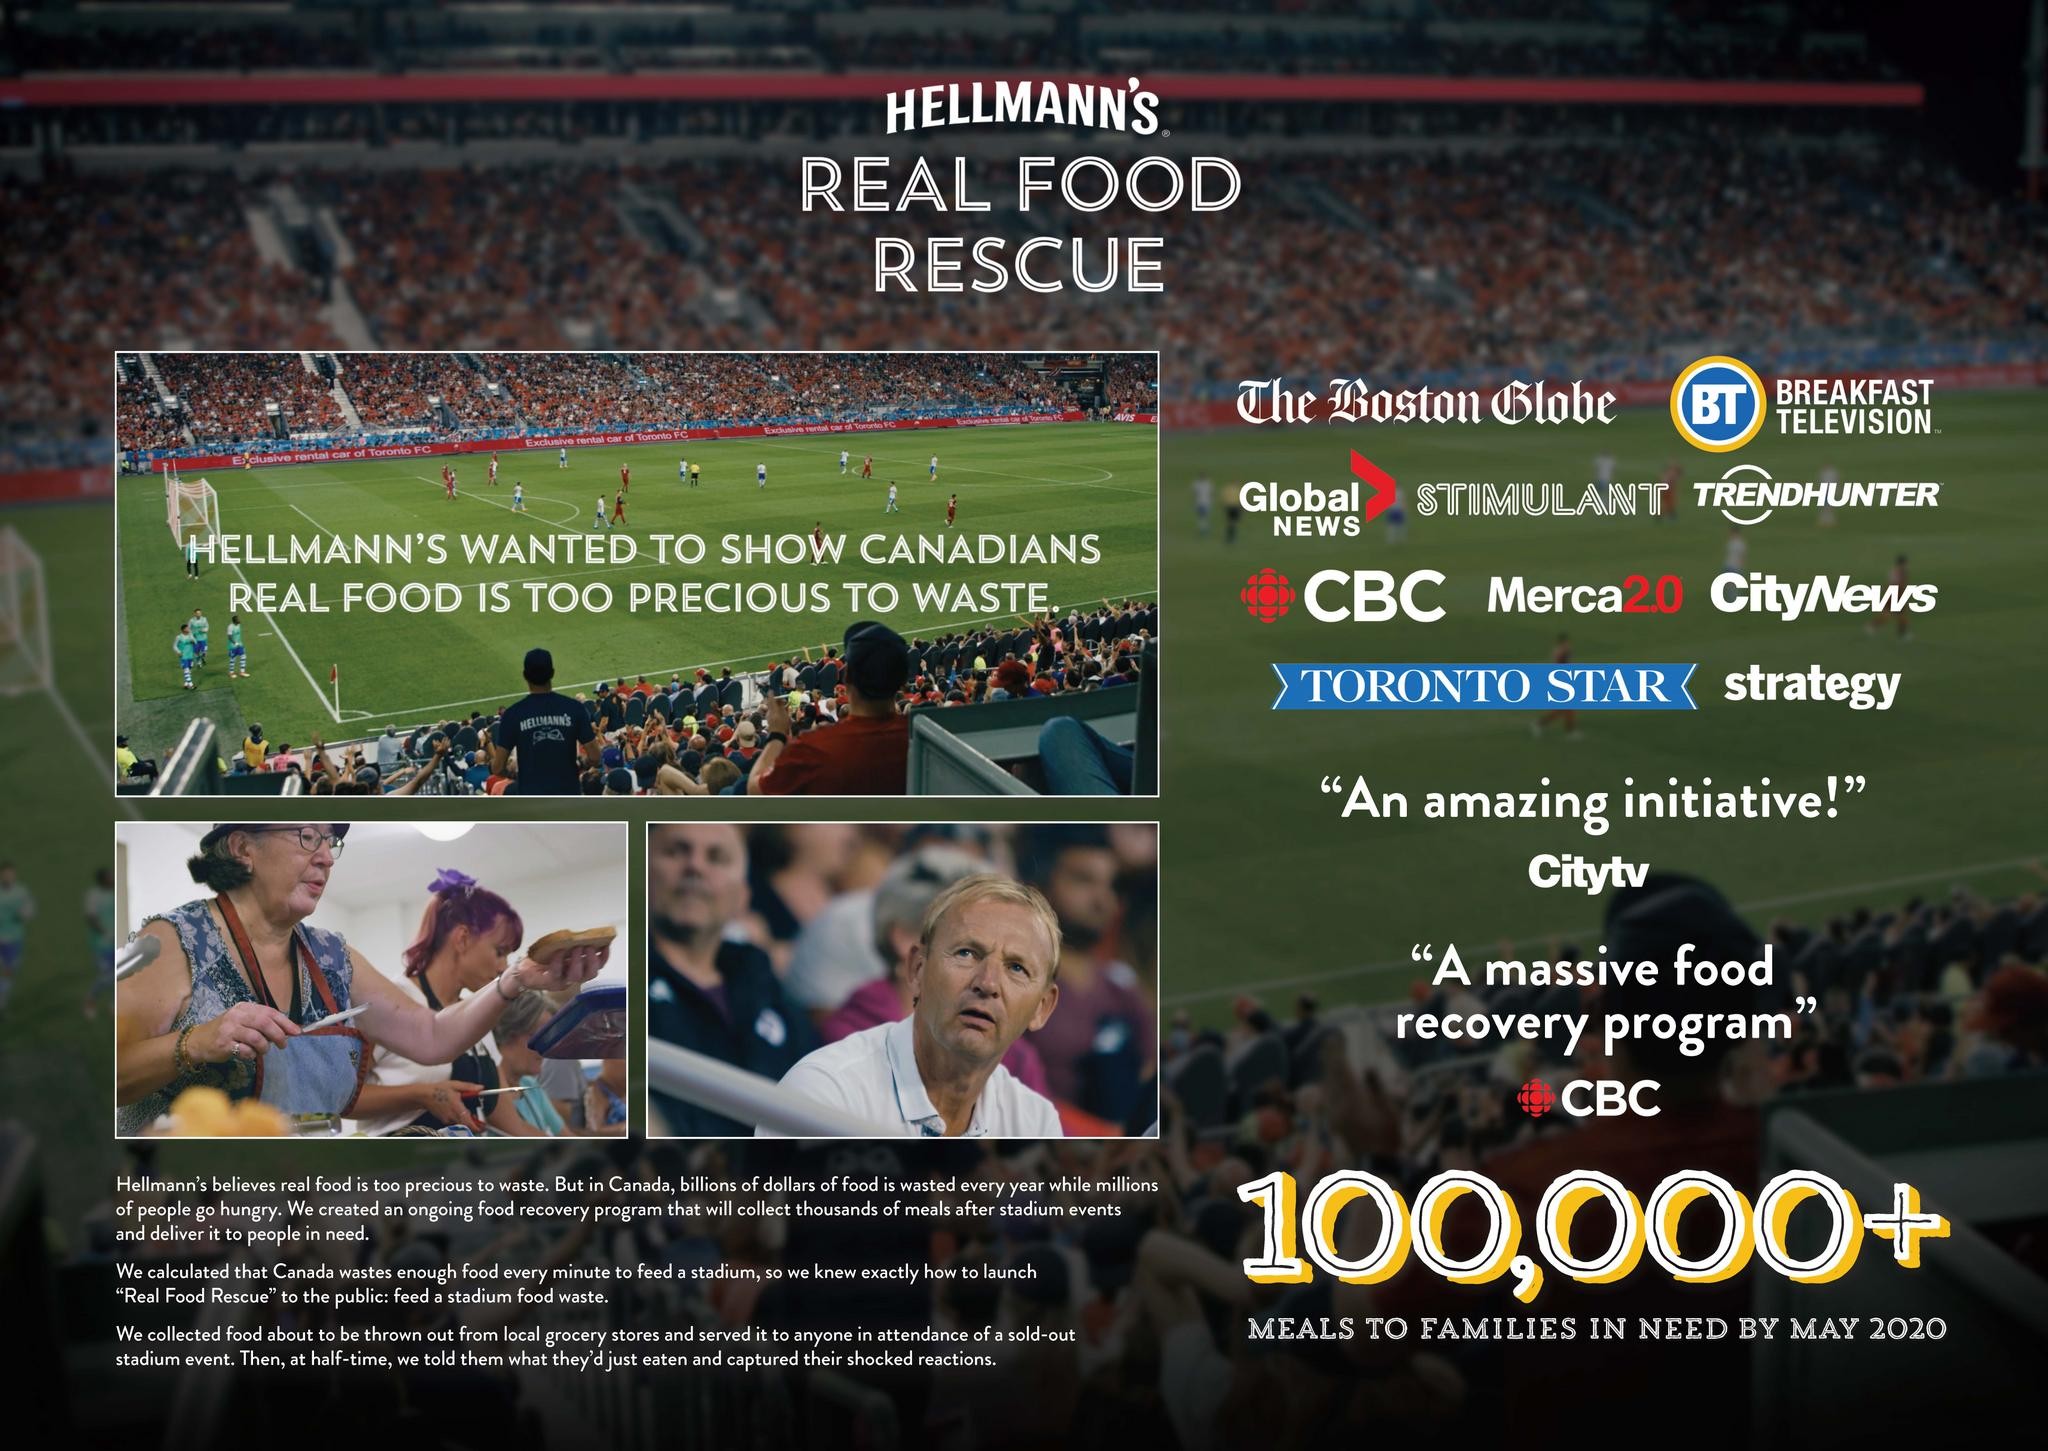 Hellmann's Real Food Rescue